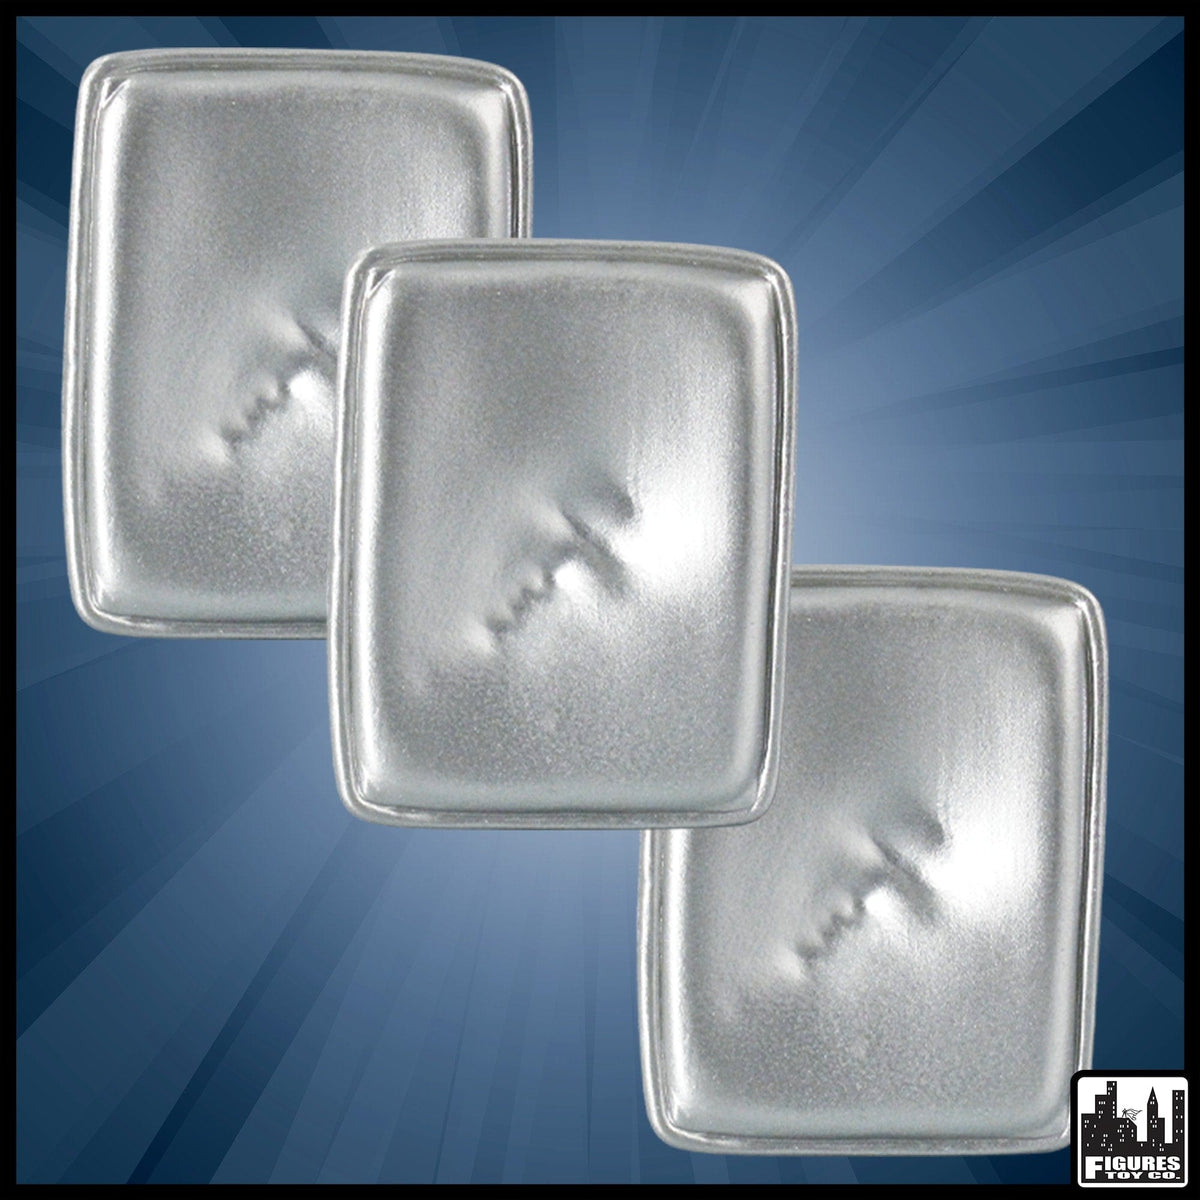 Set of 3 Silver Tray&#39;s with Smashed Faces for WWE Wrestling Action Figures